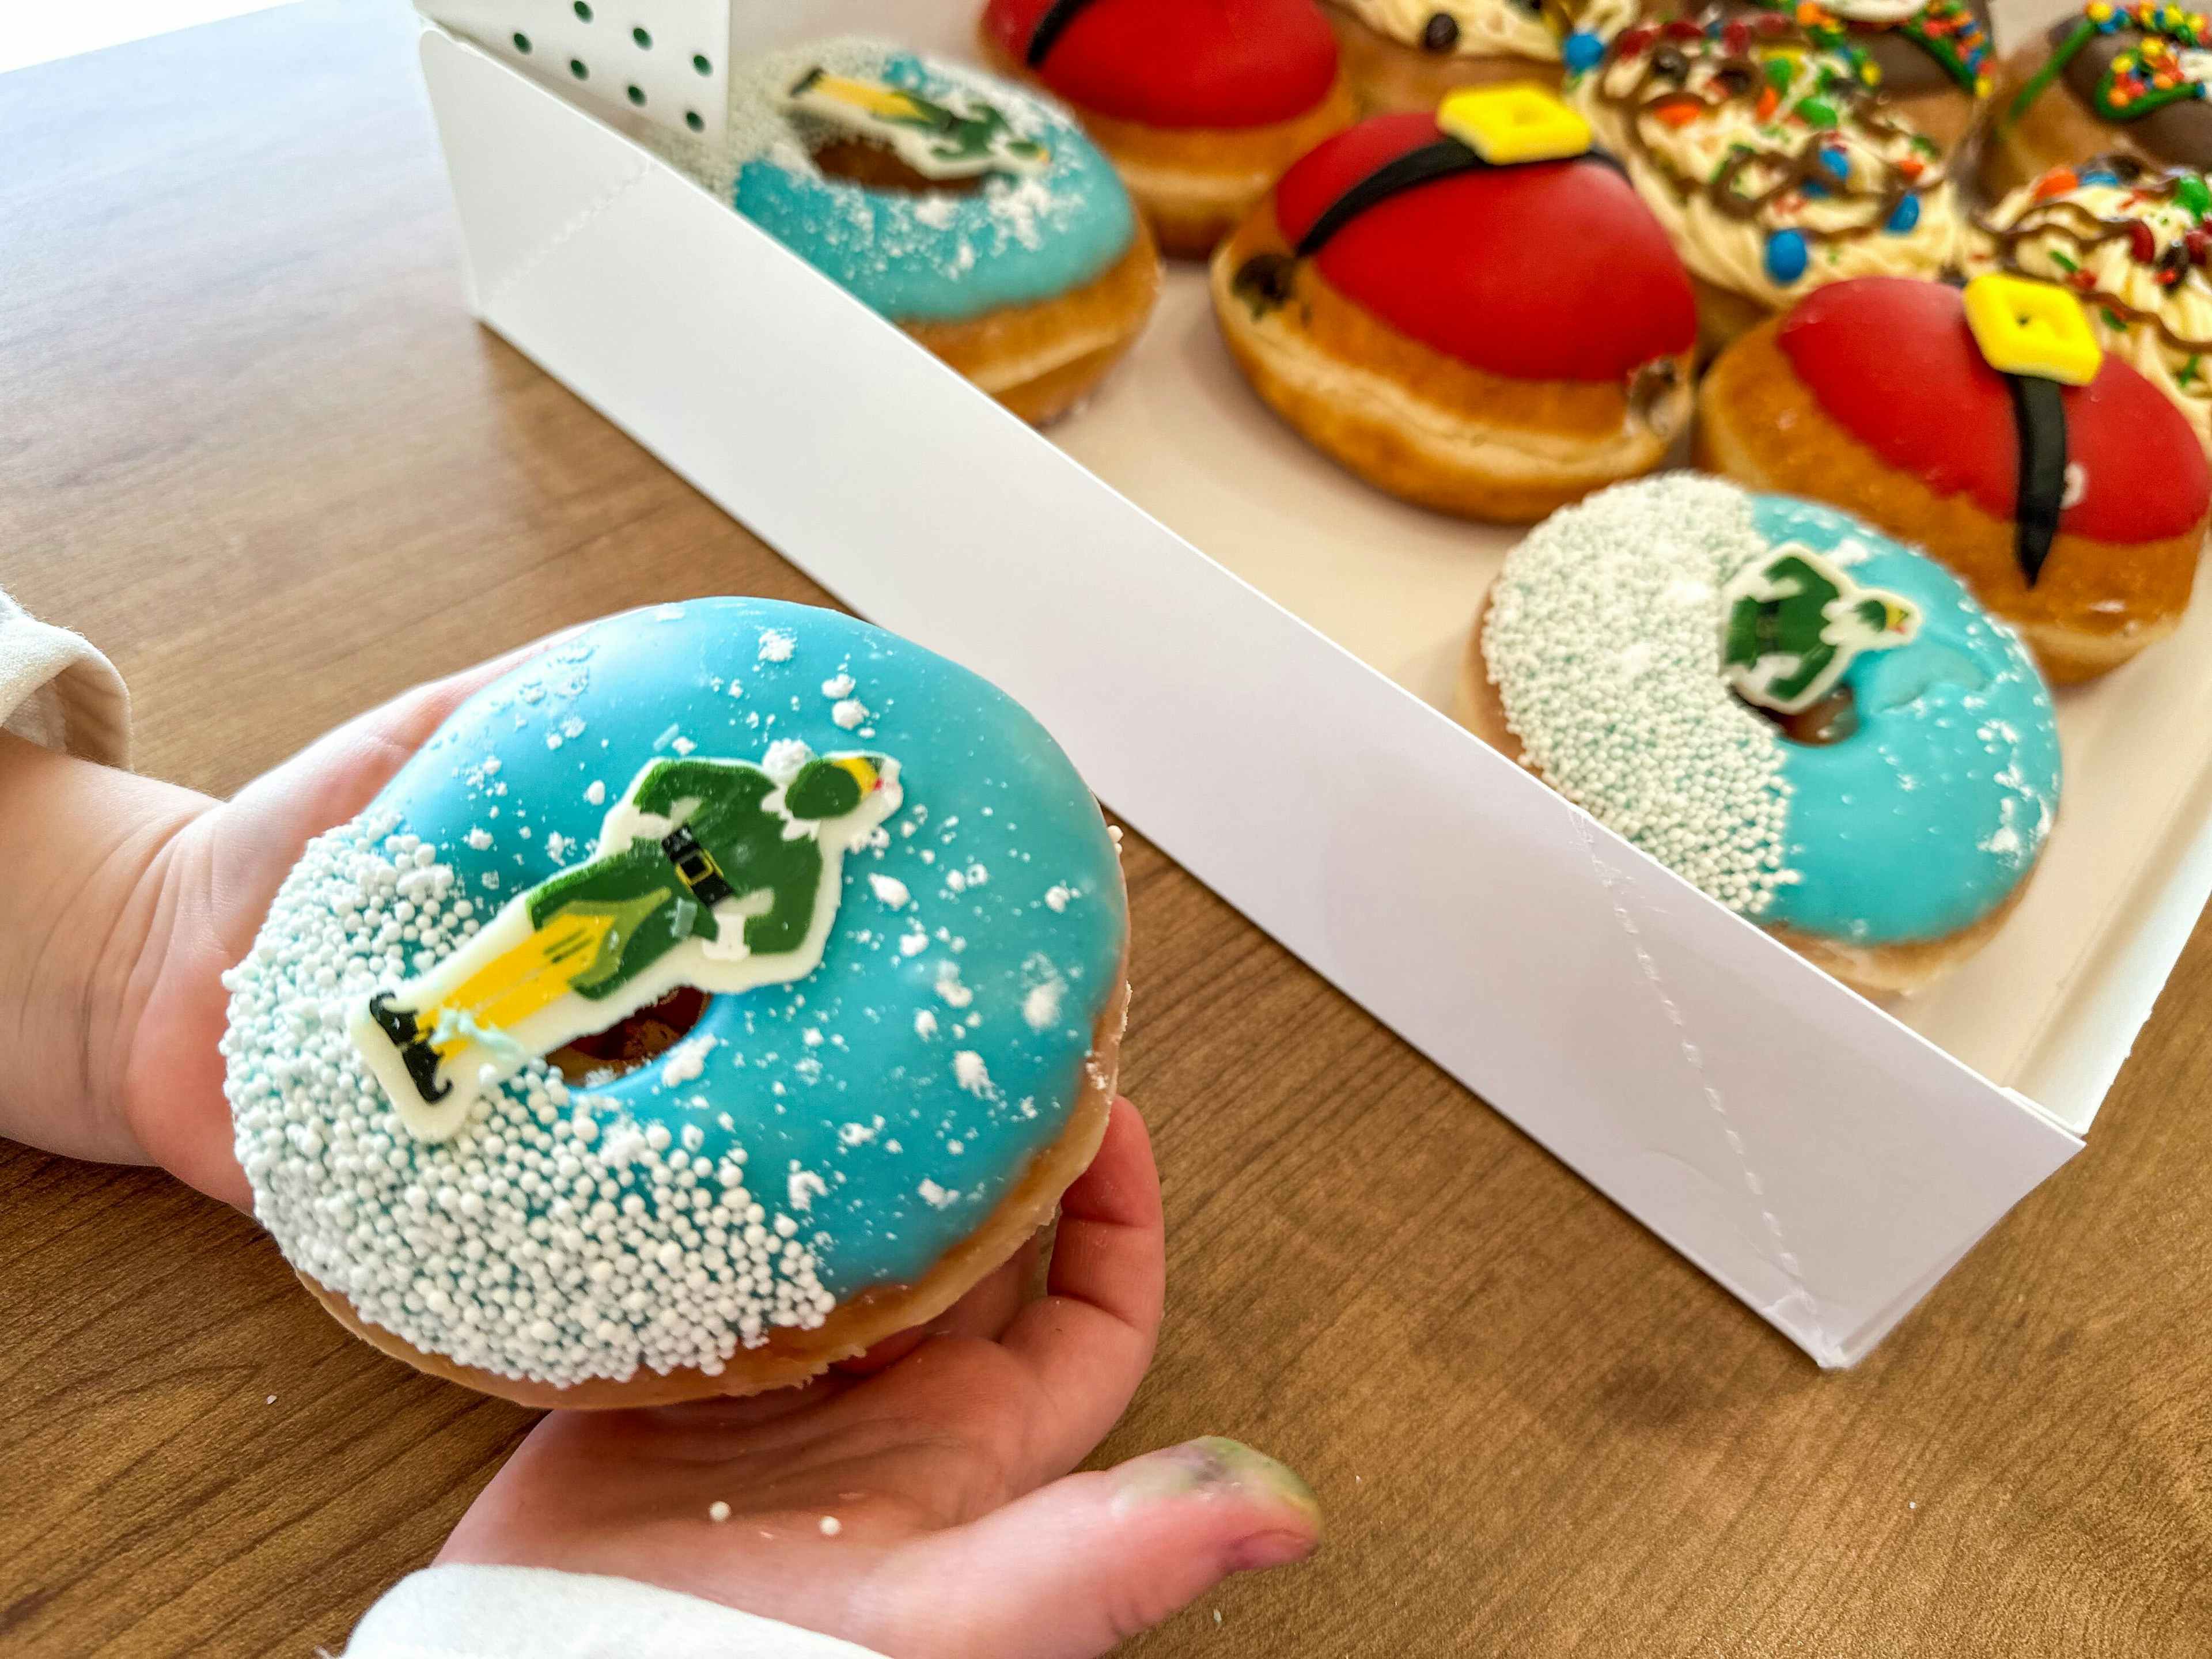 Hands holding a Elf Themed donuts from Krispy Kreme 